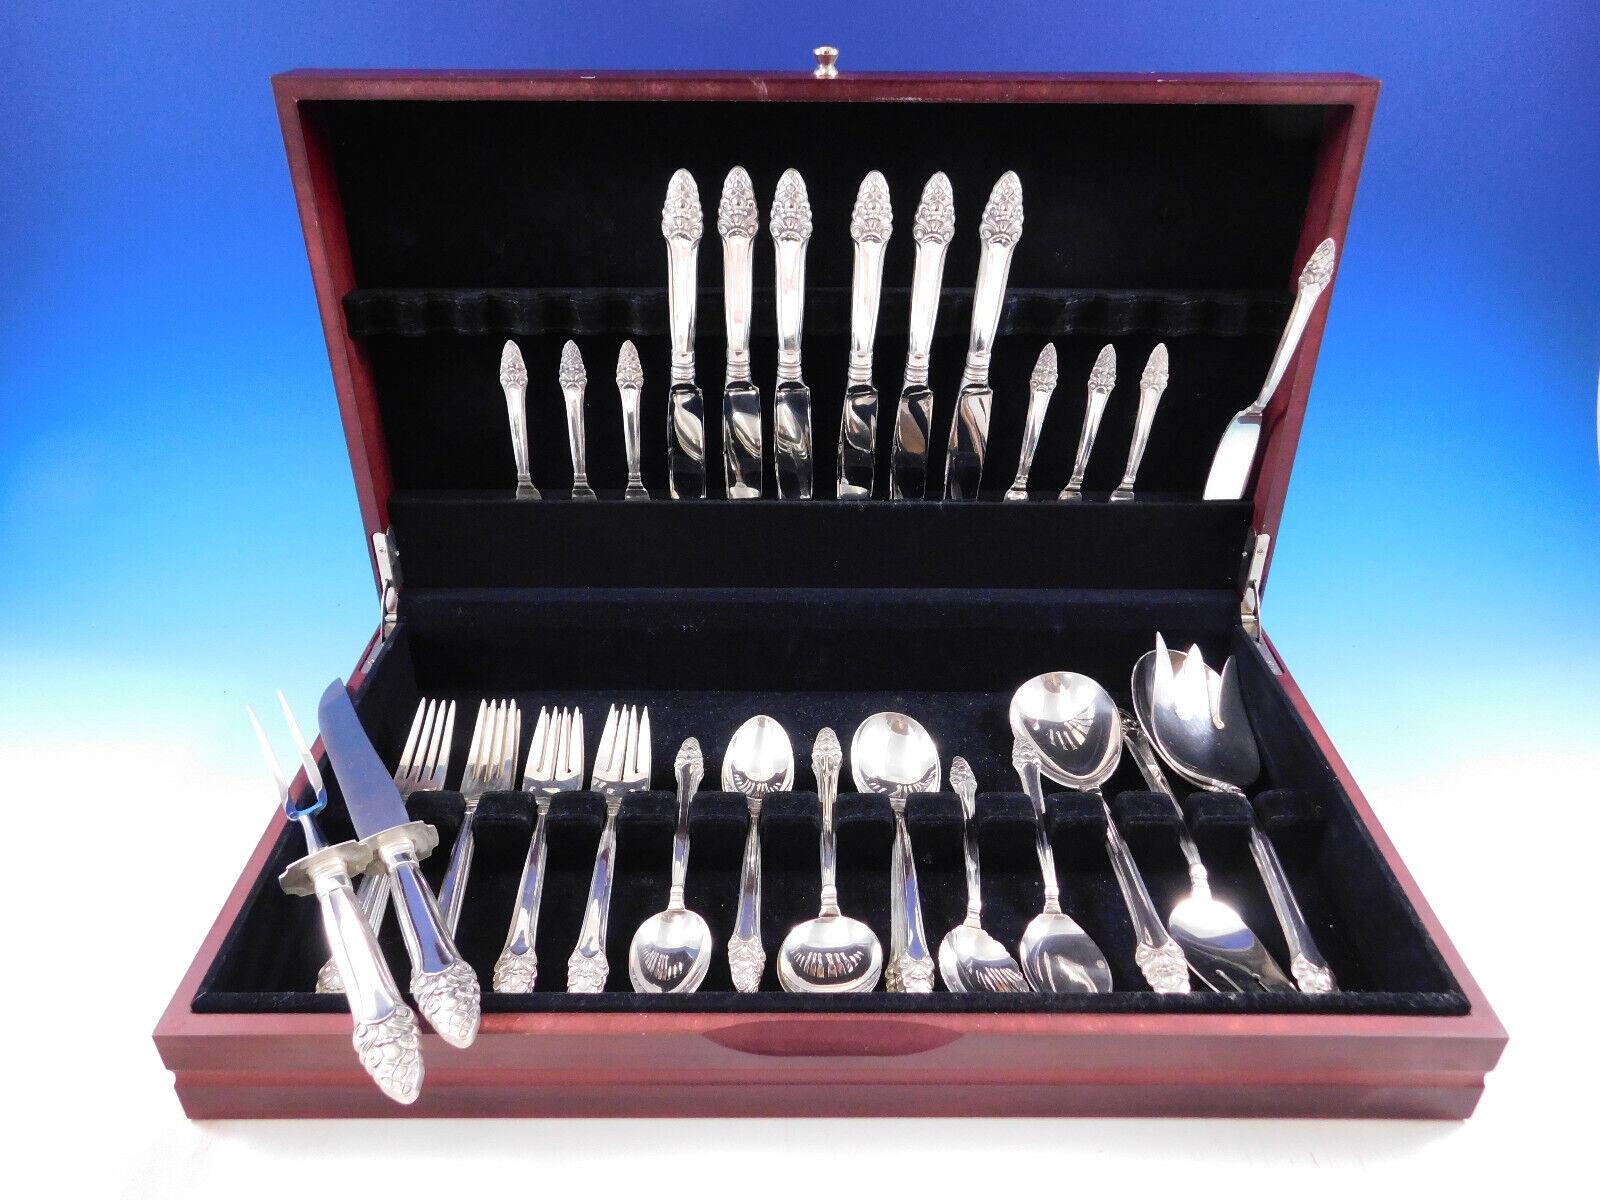 Stunning Sovereign Old by Gorham c1941 Sterling Silver Flatware set - 45 pieces. This set includes:

6 Knives, 8 7/8